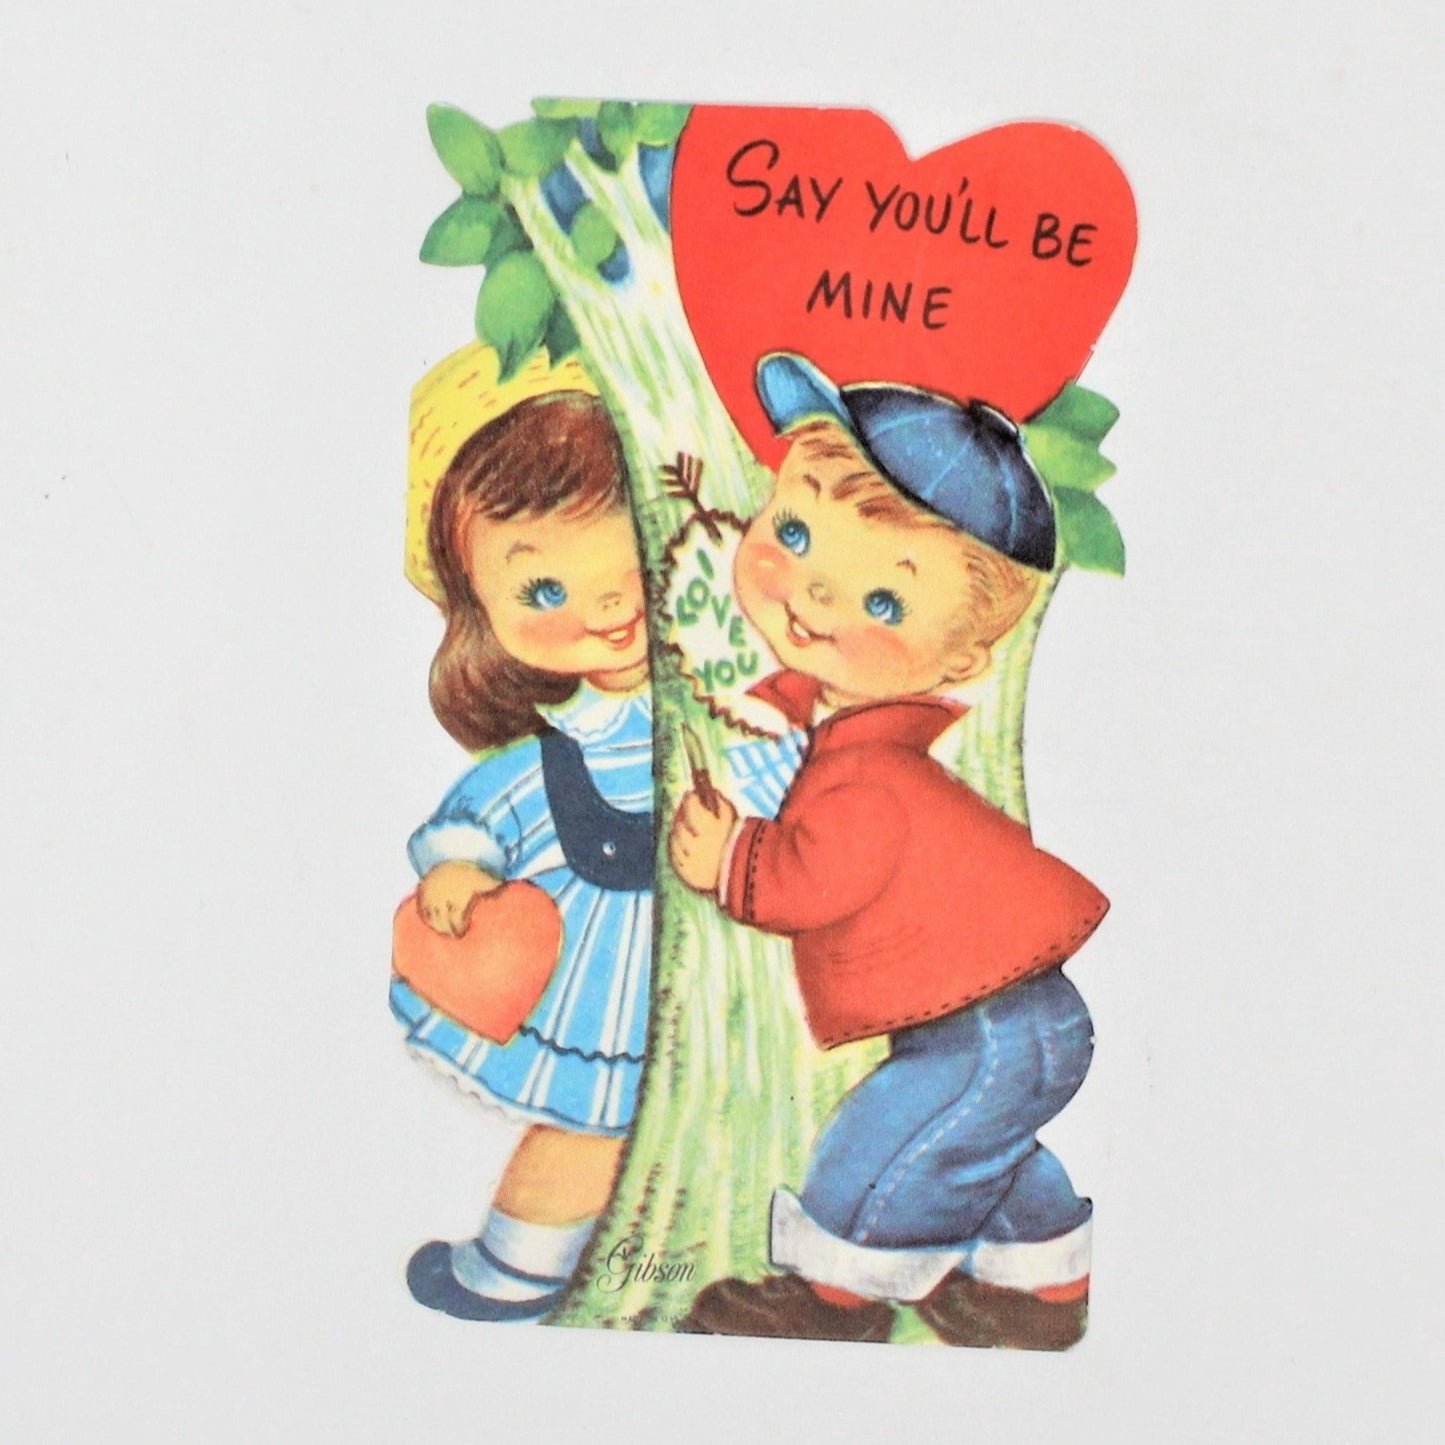 Greeting Card / Valentine's Day Card, Boy & Girl Carving Tree, Gibson, Vintage